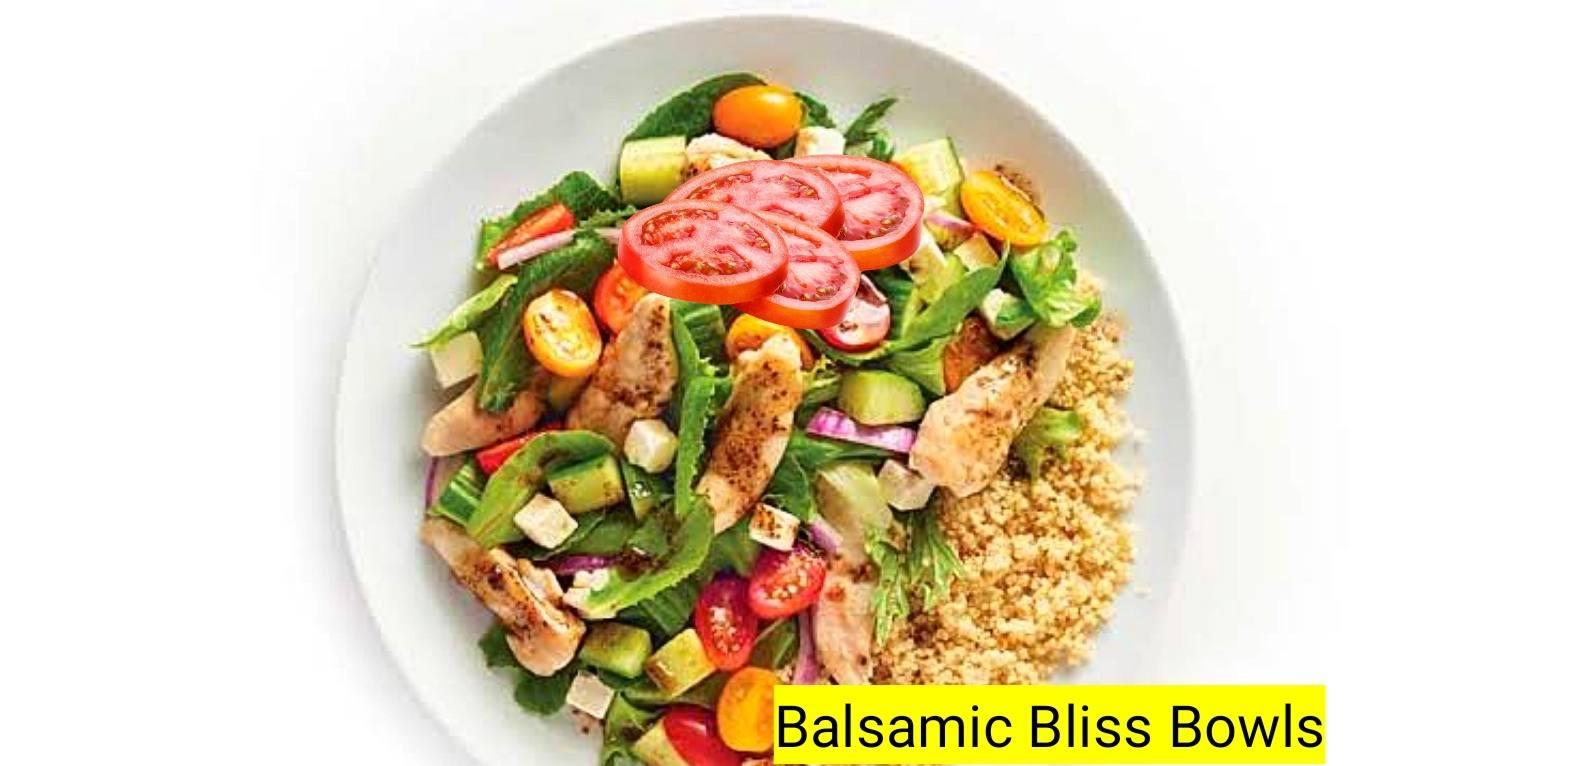 Balsamic Bliss Bowls Meal